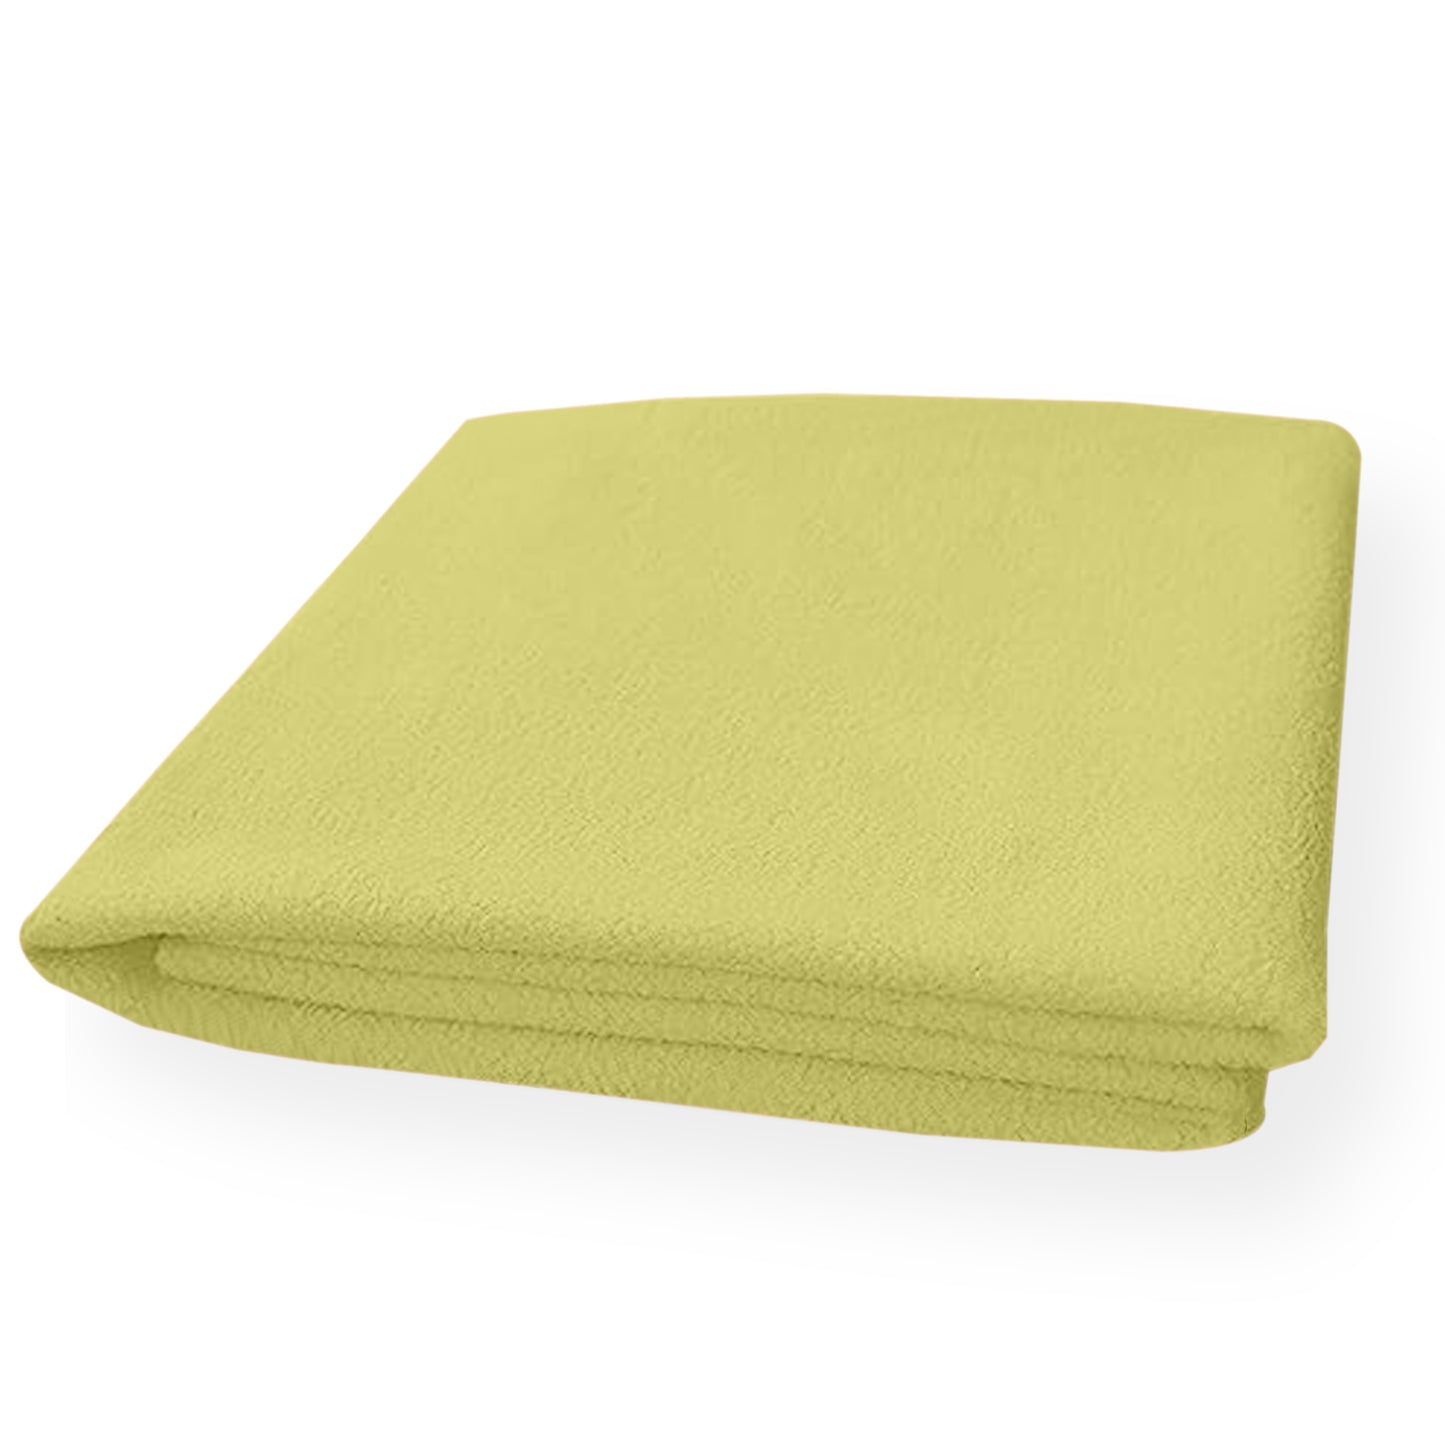 Waterproof Bed Protector, Extra Absorbent Quick Dry Sheet, Baby Bed Protector (70 X 50 CM), Pack of 2 -YELLOW